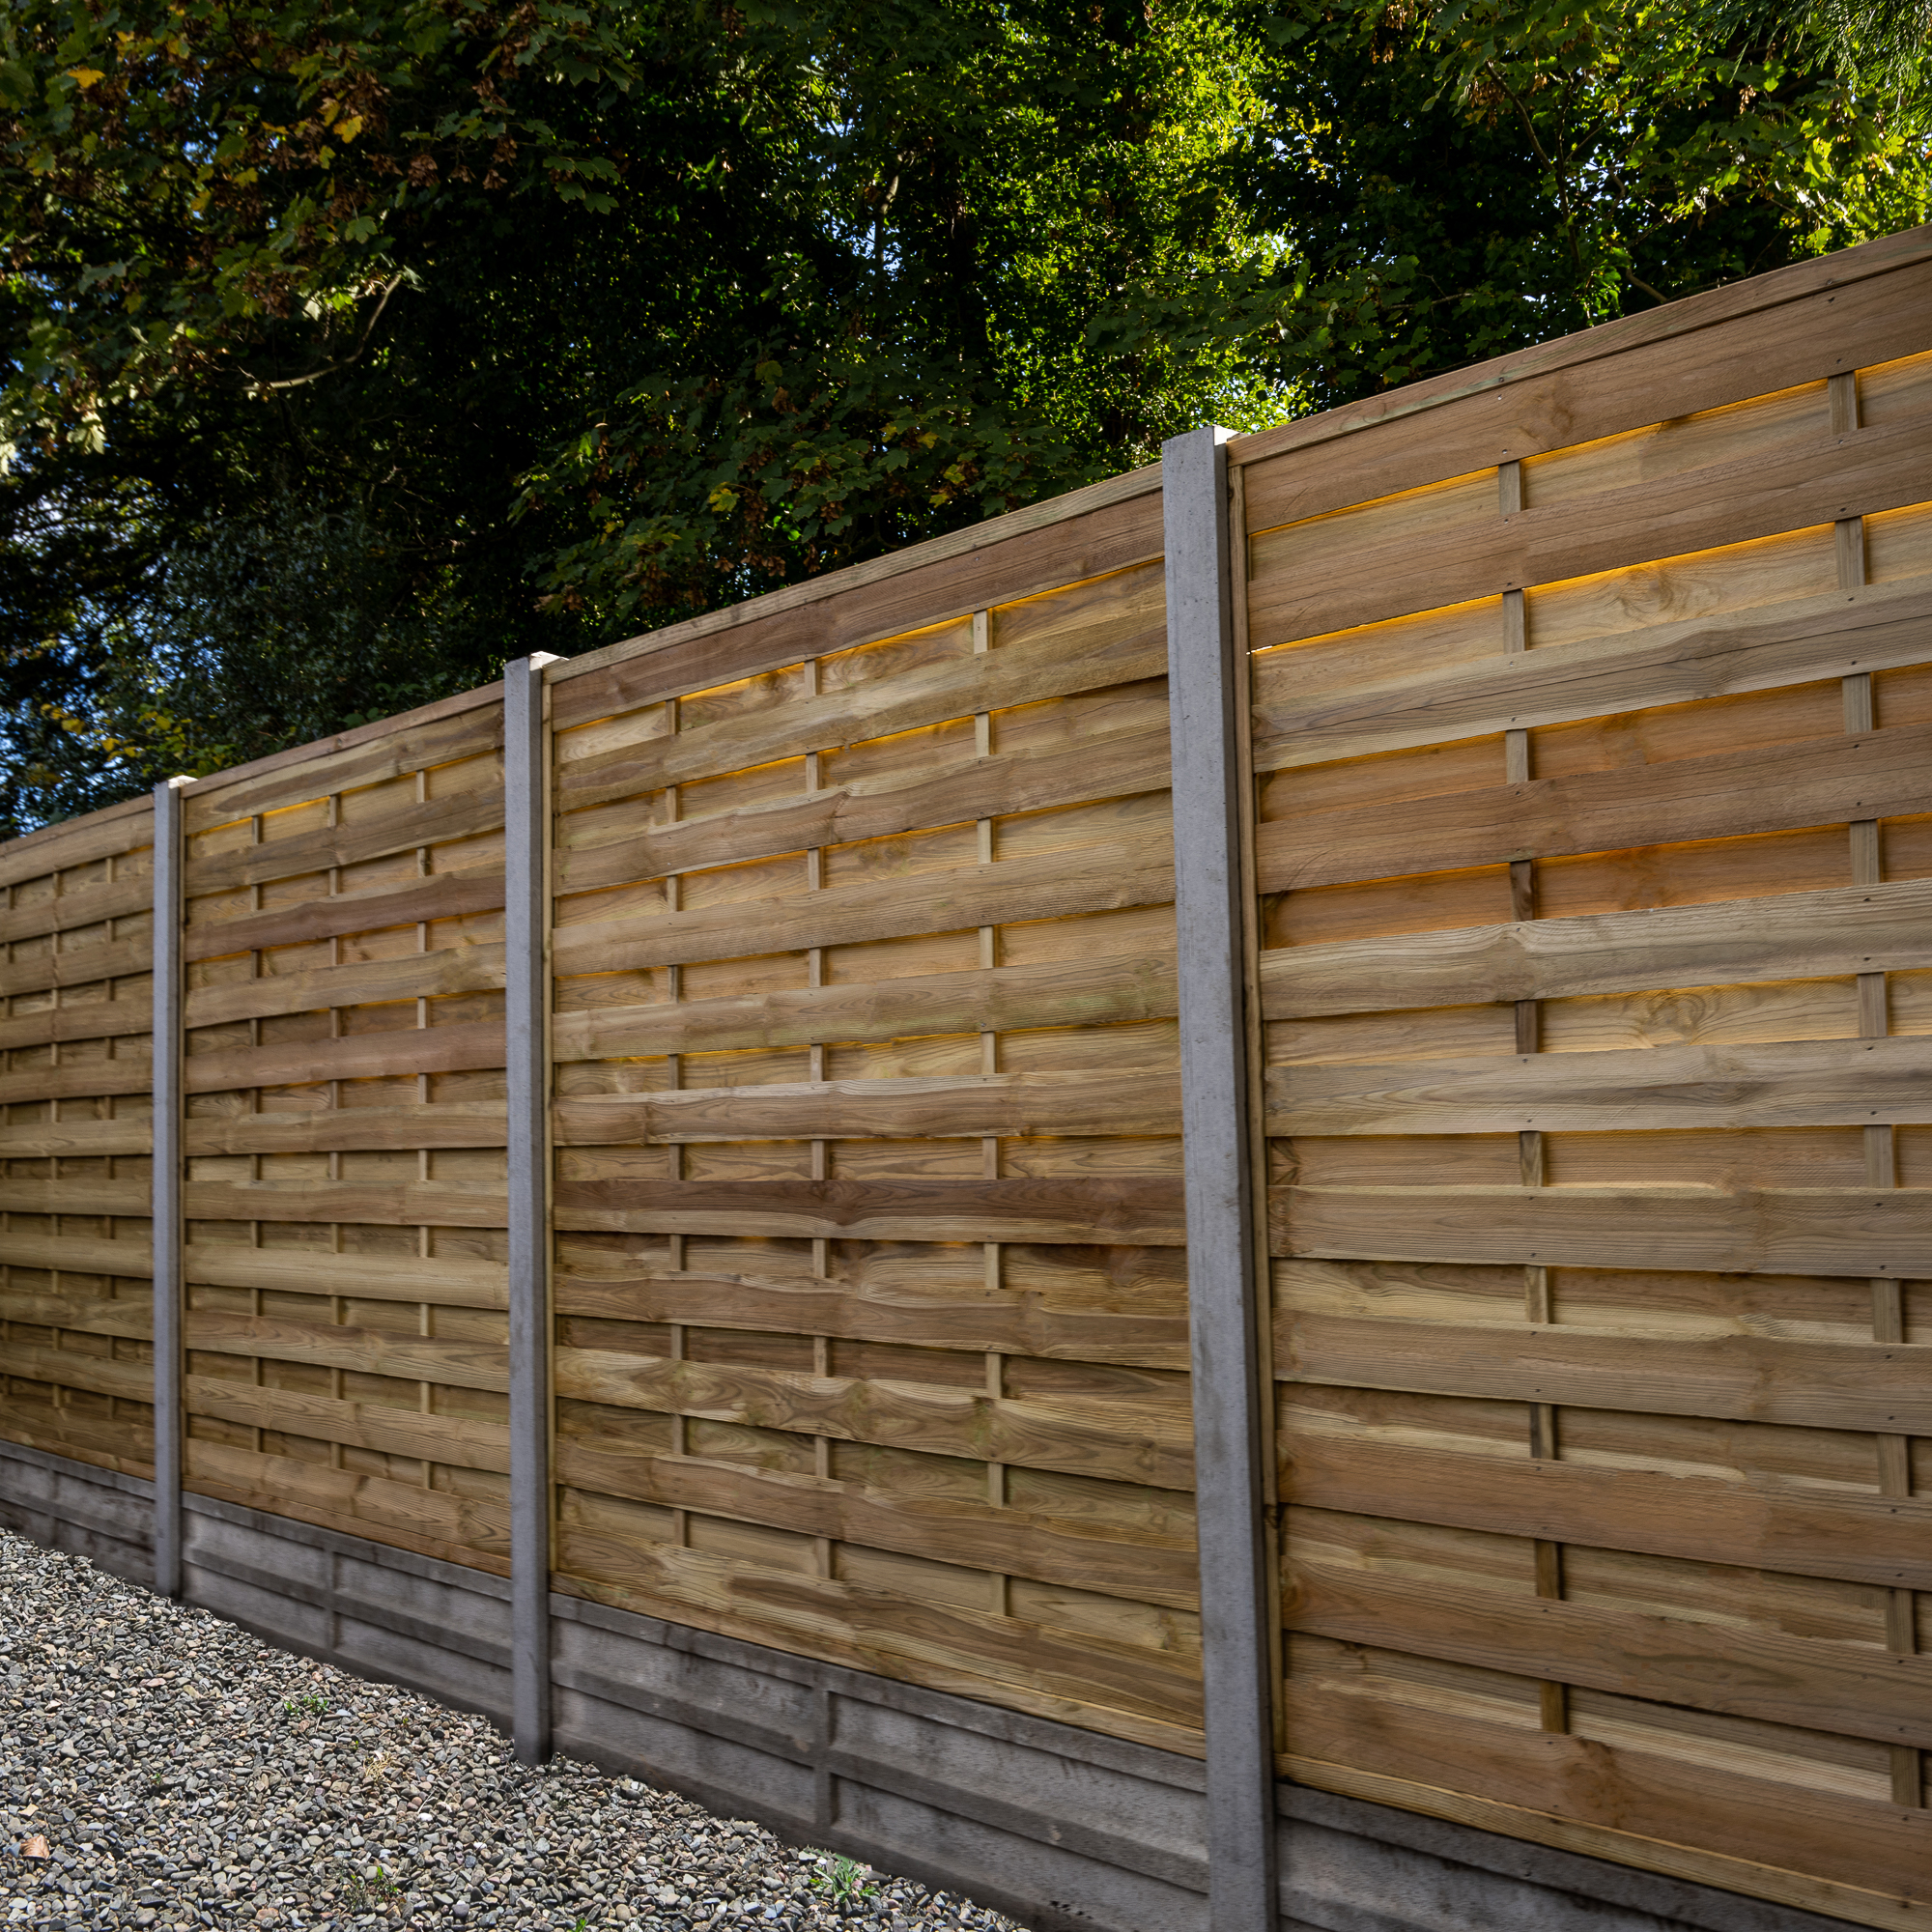 Image of Forest Garden Pressure Treated Decorative Flat Top Fence Panel - 1800 x 1800mm - 6 x 6ft - Pack of 3